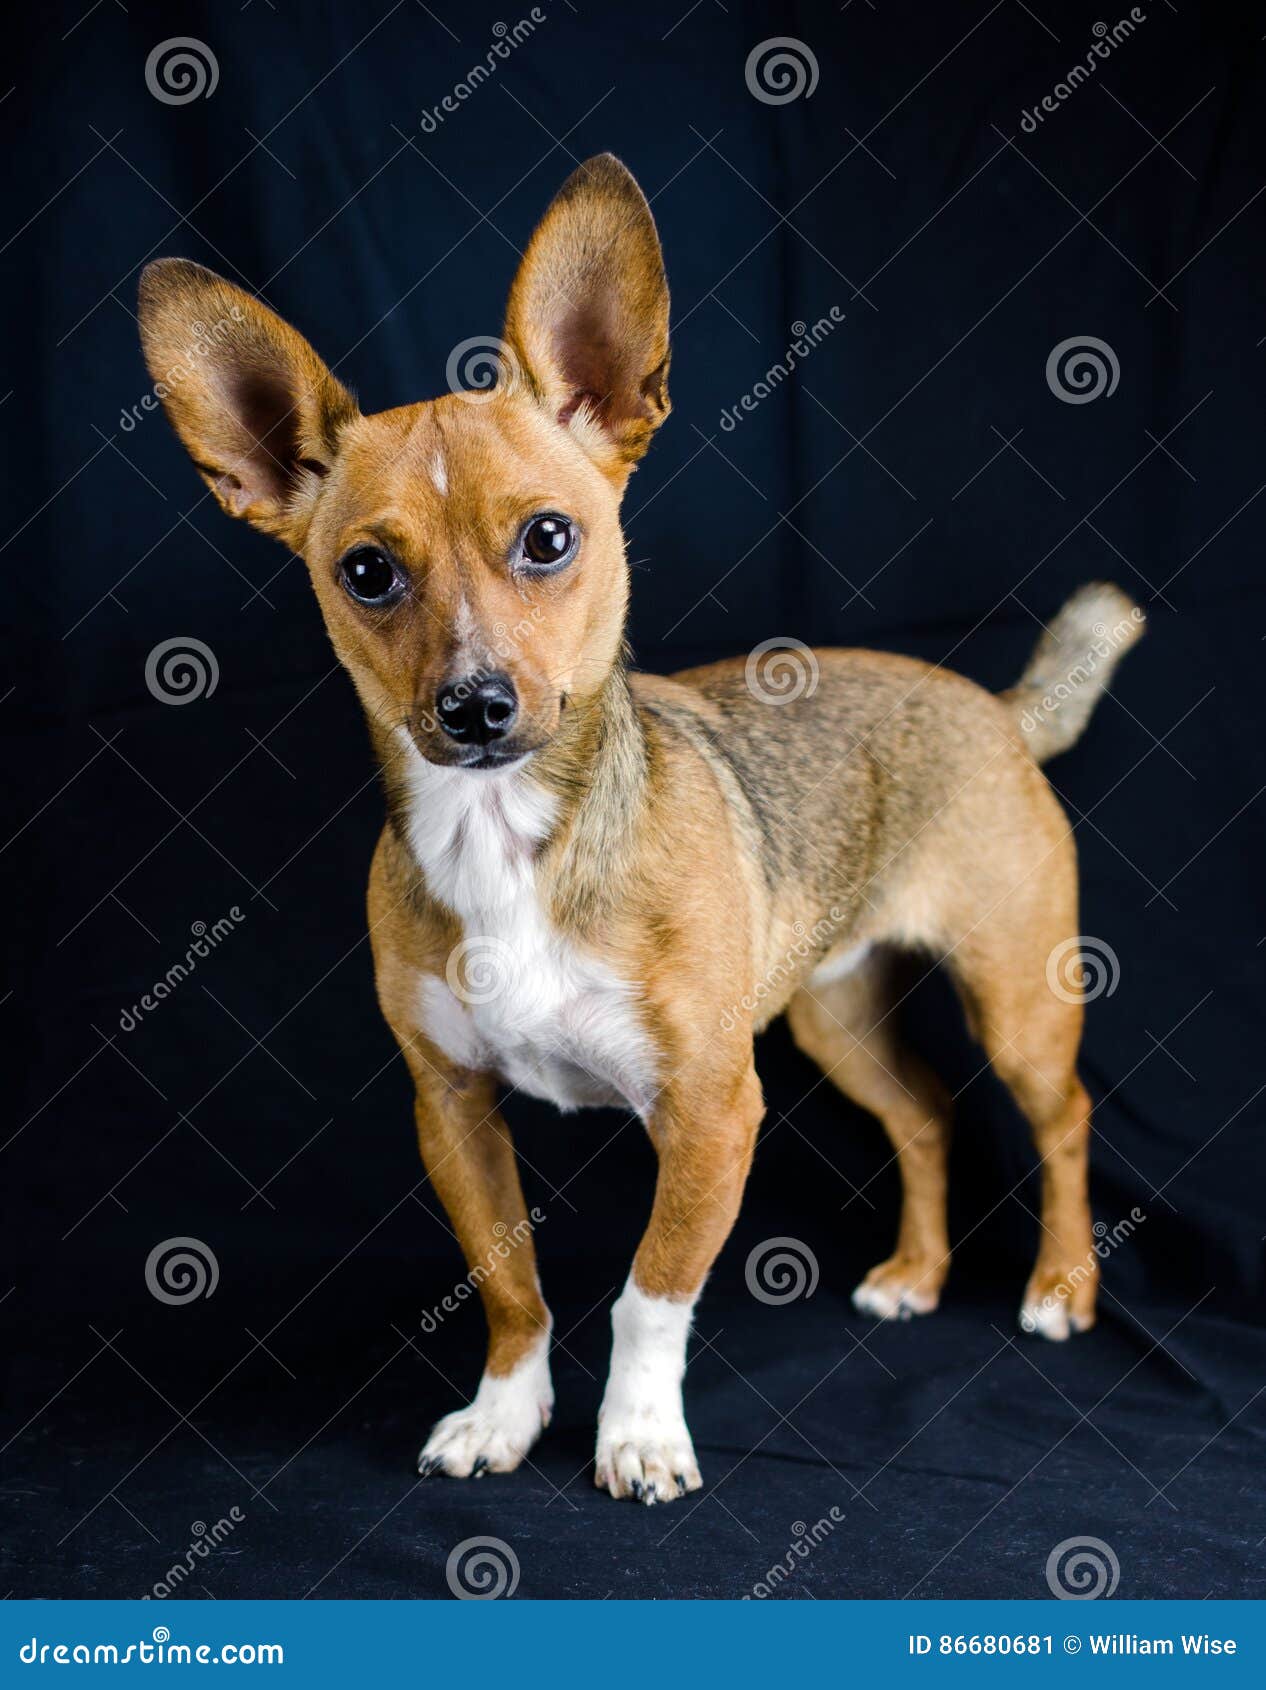 Rat Terrier Chihuahua Mixed Breed Dog Stock Image Image Of Companion Blond 86680681